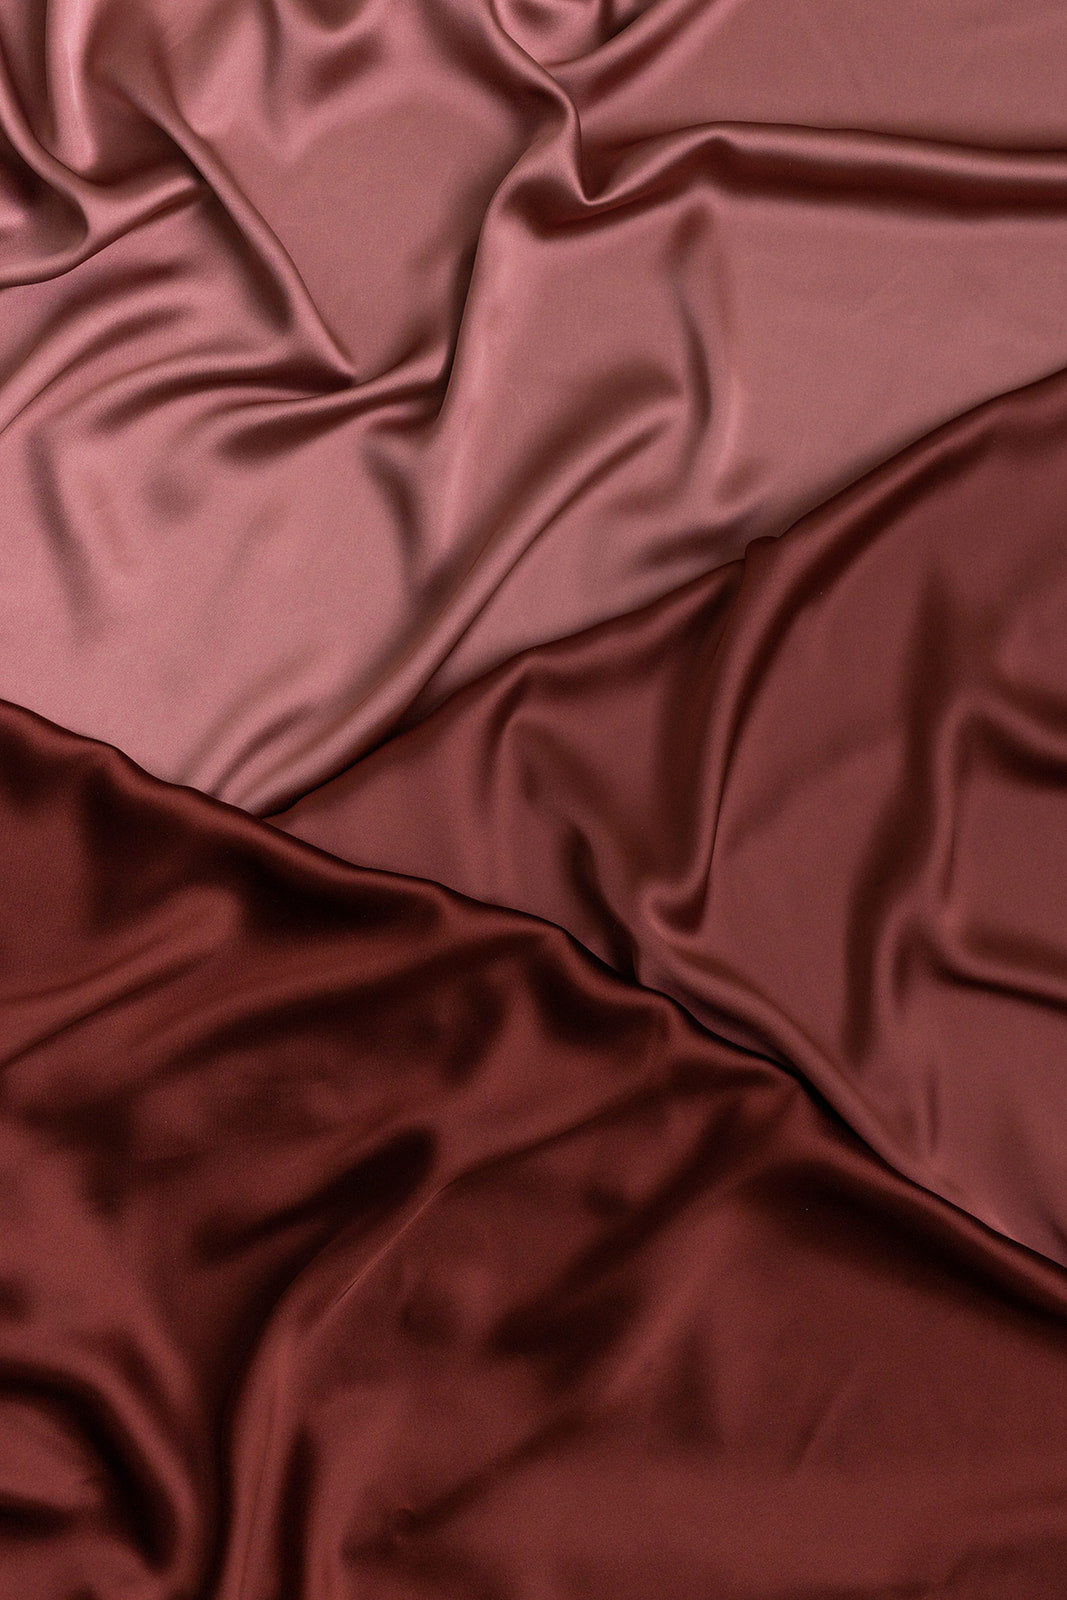 Premium Photo  Red silk or satin luxury fabric texture can use as